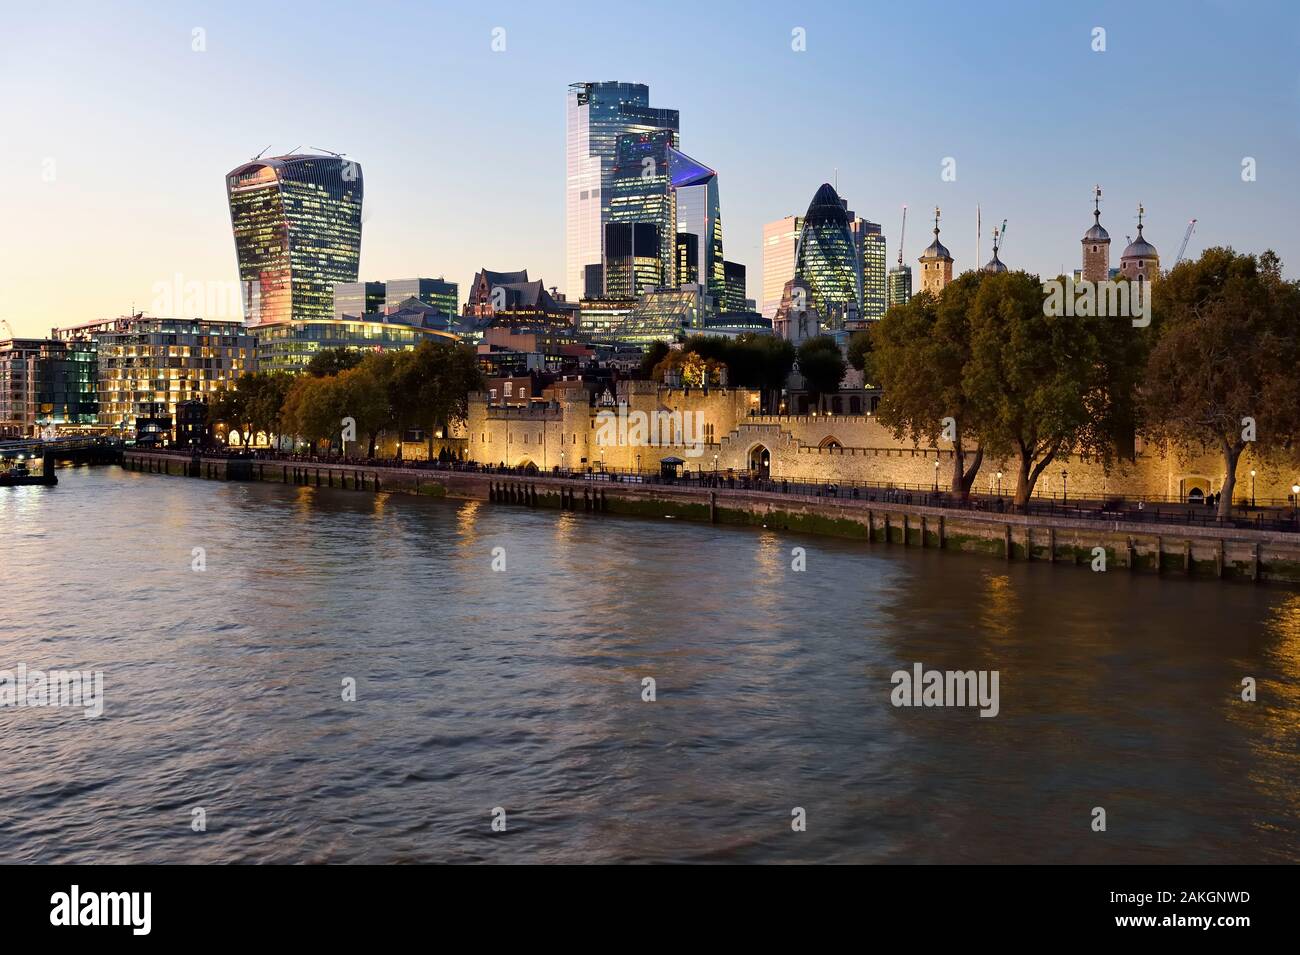 United Kingdom, London, the River Thames, the Tower of London, the City with its skyscrapers, the tower known as the Walkie Talkie designed by architect Rafael Viñoly, Tower 30 St Mary Axe or Swiss Re Building also known as the gherkin designed by architect Norman Foster Stock Photo